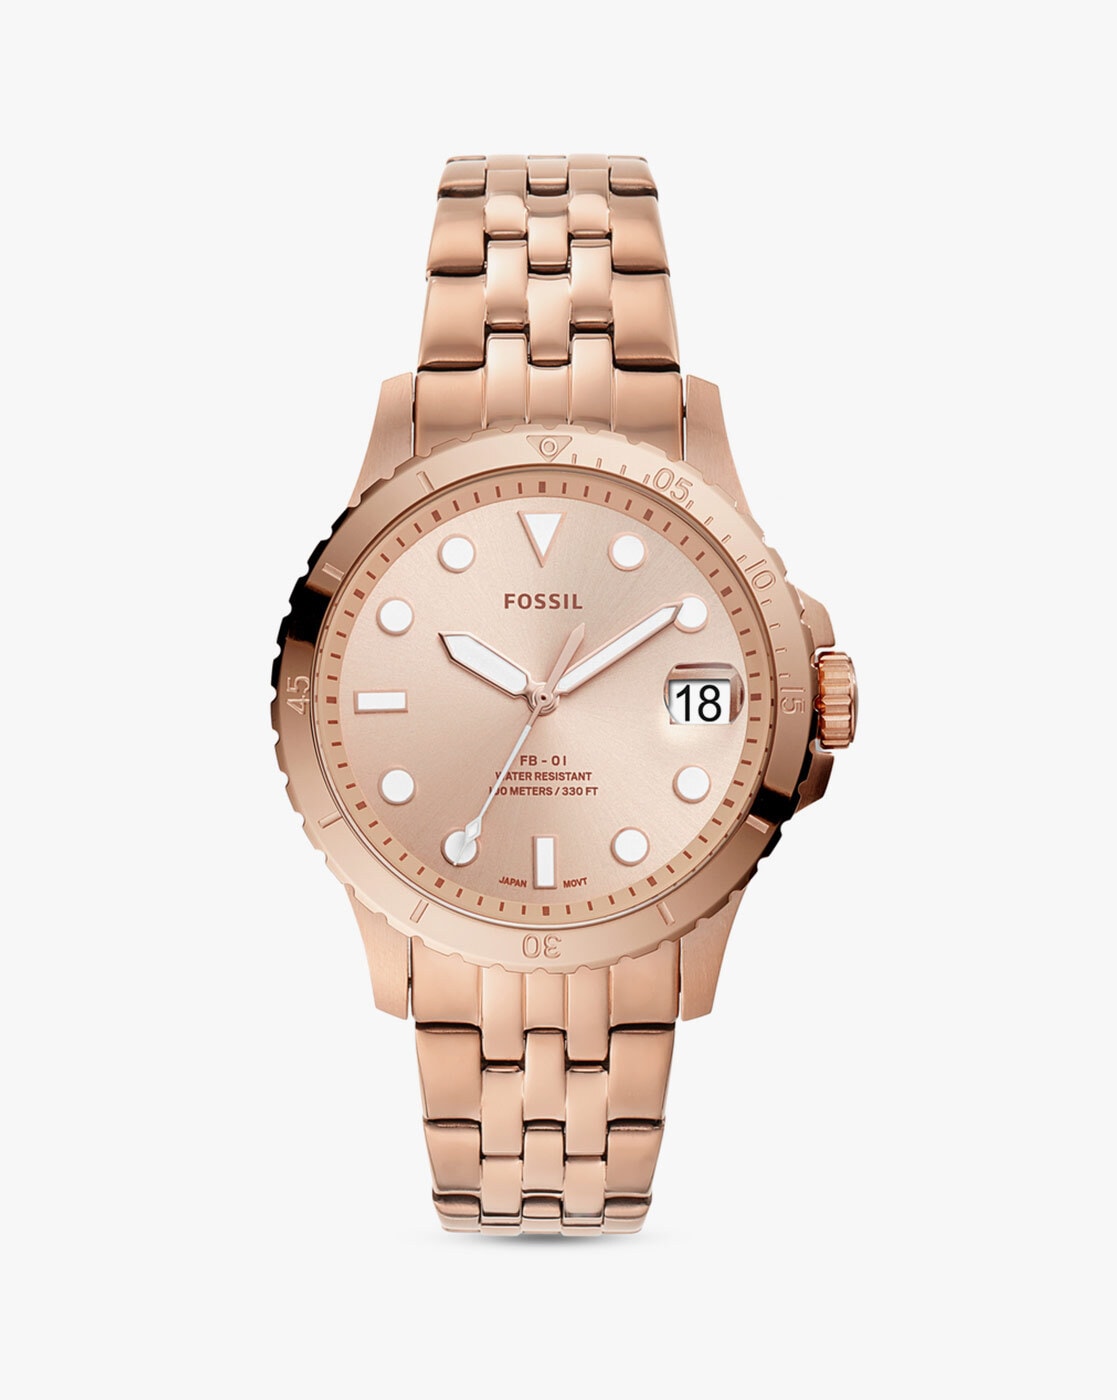 Top 30+ imagen fossil rose gold watch - Abzlocal.mx